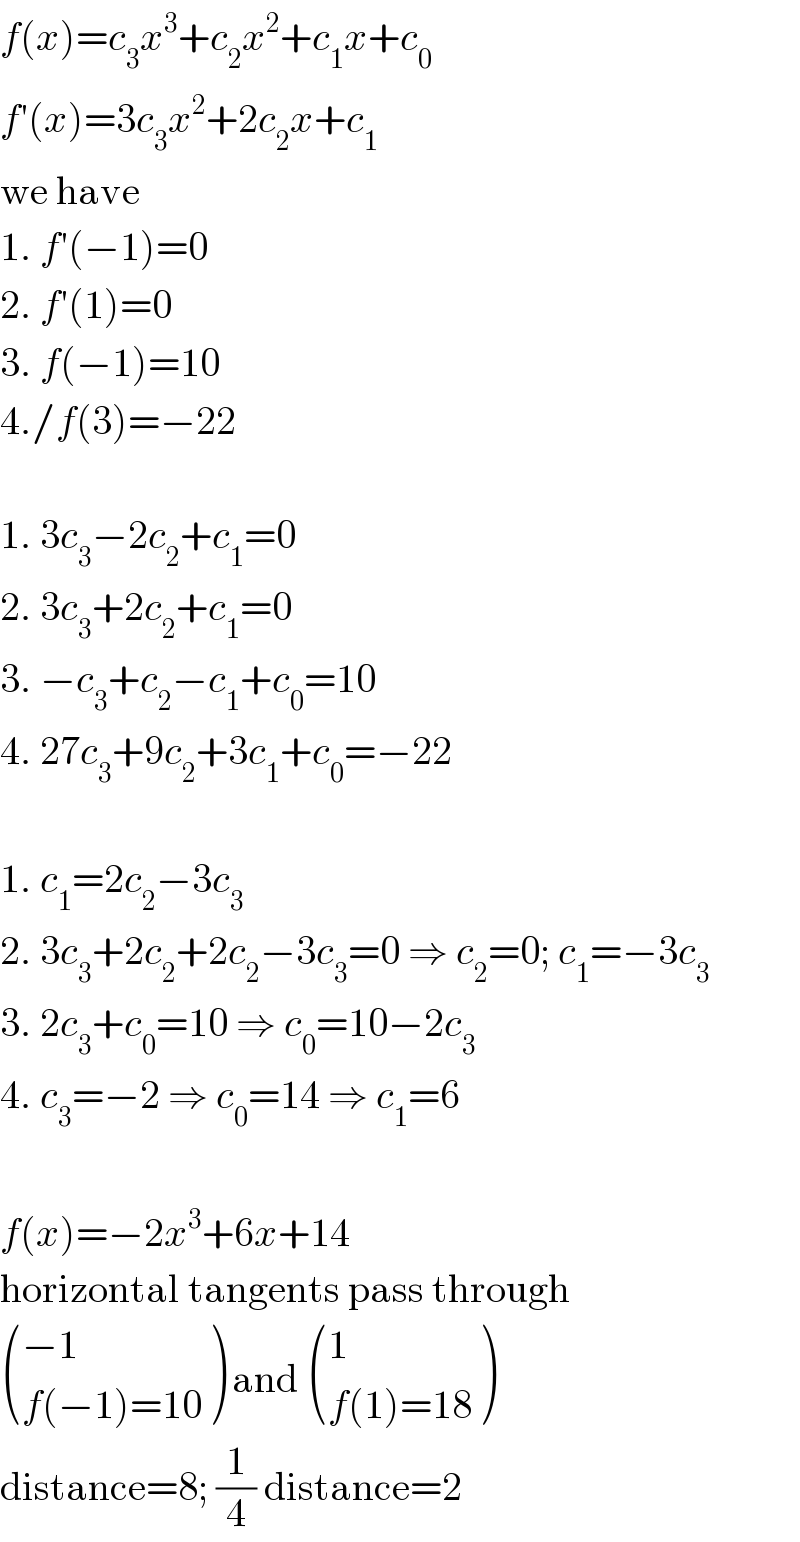 f(x)=c_3 x^3 +c_2 x^2 +c_1 x+c_0   f′(x)=3c_3 x^2 +2c_2 x+c_1   we have  1. f′(−1)=0  2. f′(1)=0  3. f(−1)=10  4./f(3)=−22    1. 3c_3 −2c_2 +c_1 =0  2. 3c_3 +2c_2 +c_1 =0  3. −c_3 +c_2 −c_1 +c_0 =10  4. 27c_3 +9c_2 +3c_1 +c_0 =−22    1. c_1 =2c_2 −3c_3   2. 3c_3 +2c_2 +2c_2 −3c_3 =0 ⇒ c_2 =0; c_1 =−3c_3   3. 2c_3 +c_0 =10 ⇒ c_0 =10−2c_3   4. c_3 =−2 ⇒ c_0 =14 ⇒ c_1 =6    f(x)=−2x^3 +6x+14  horizontal tangents pass through   (((−1)),((f(−1)=10)) ) and  ((1),((f(1)=18)) )  distance=8; (1/4) distance=2  